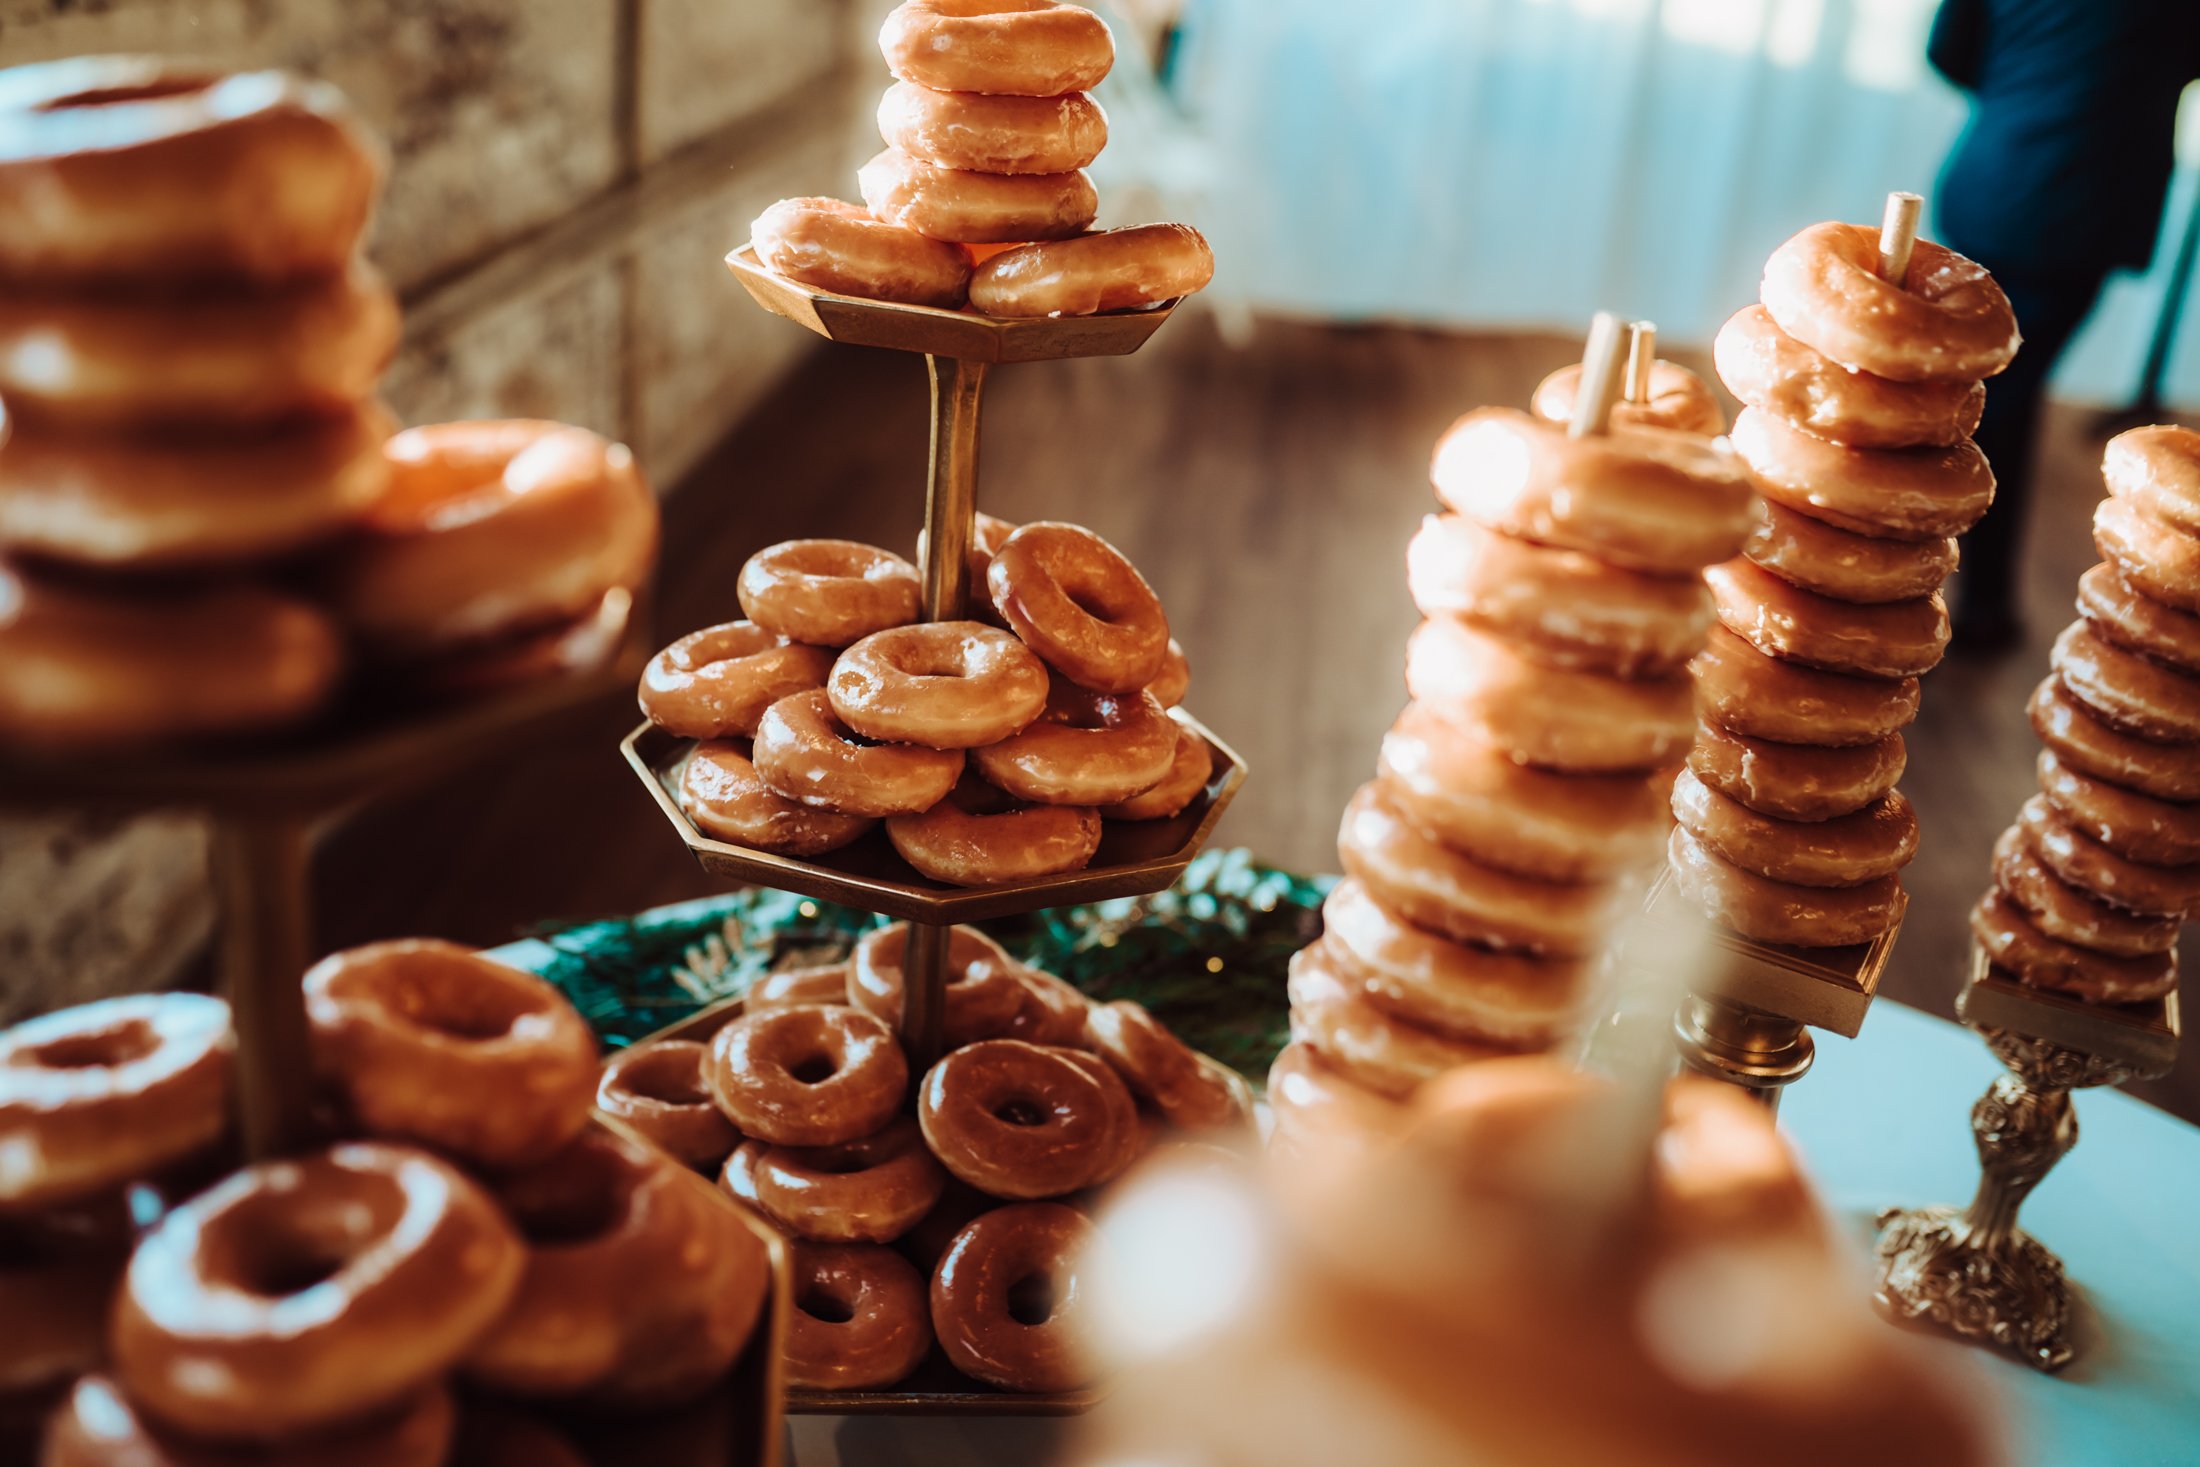 Donut cake at the wedding